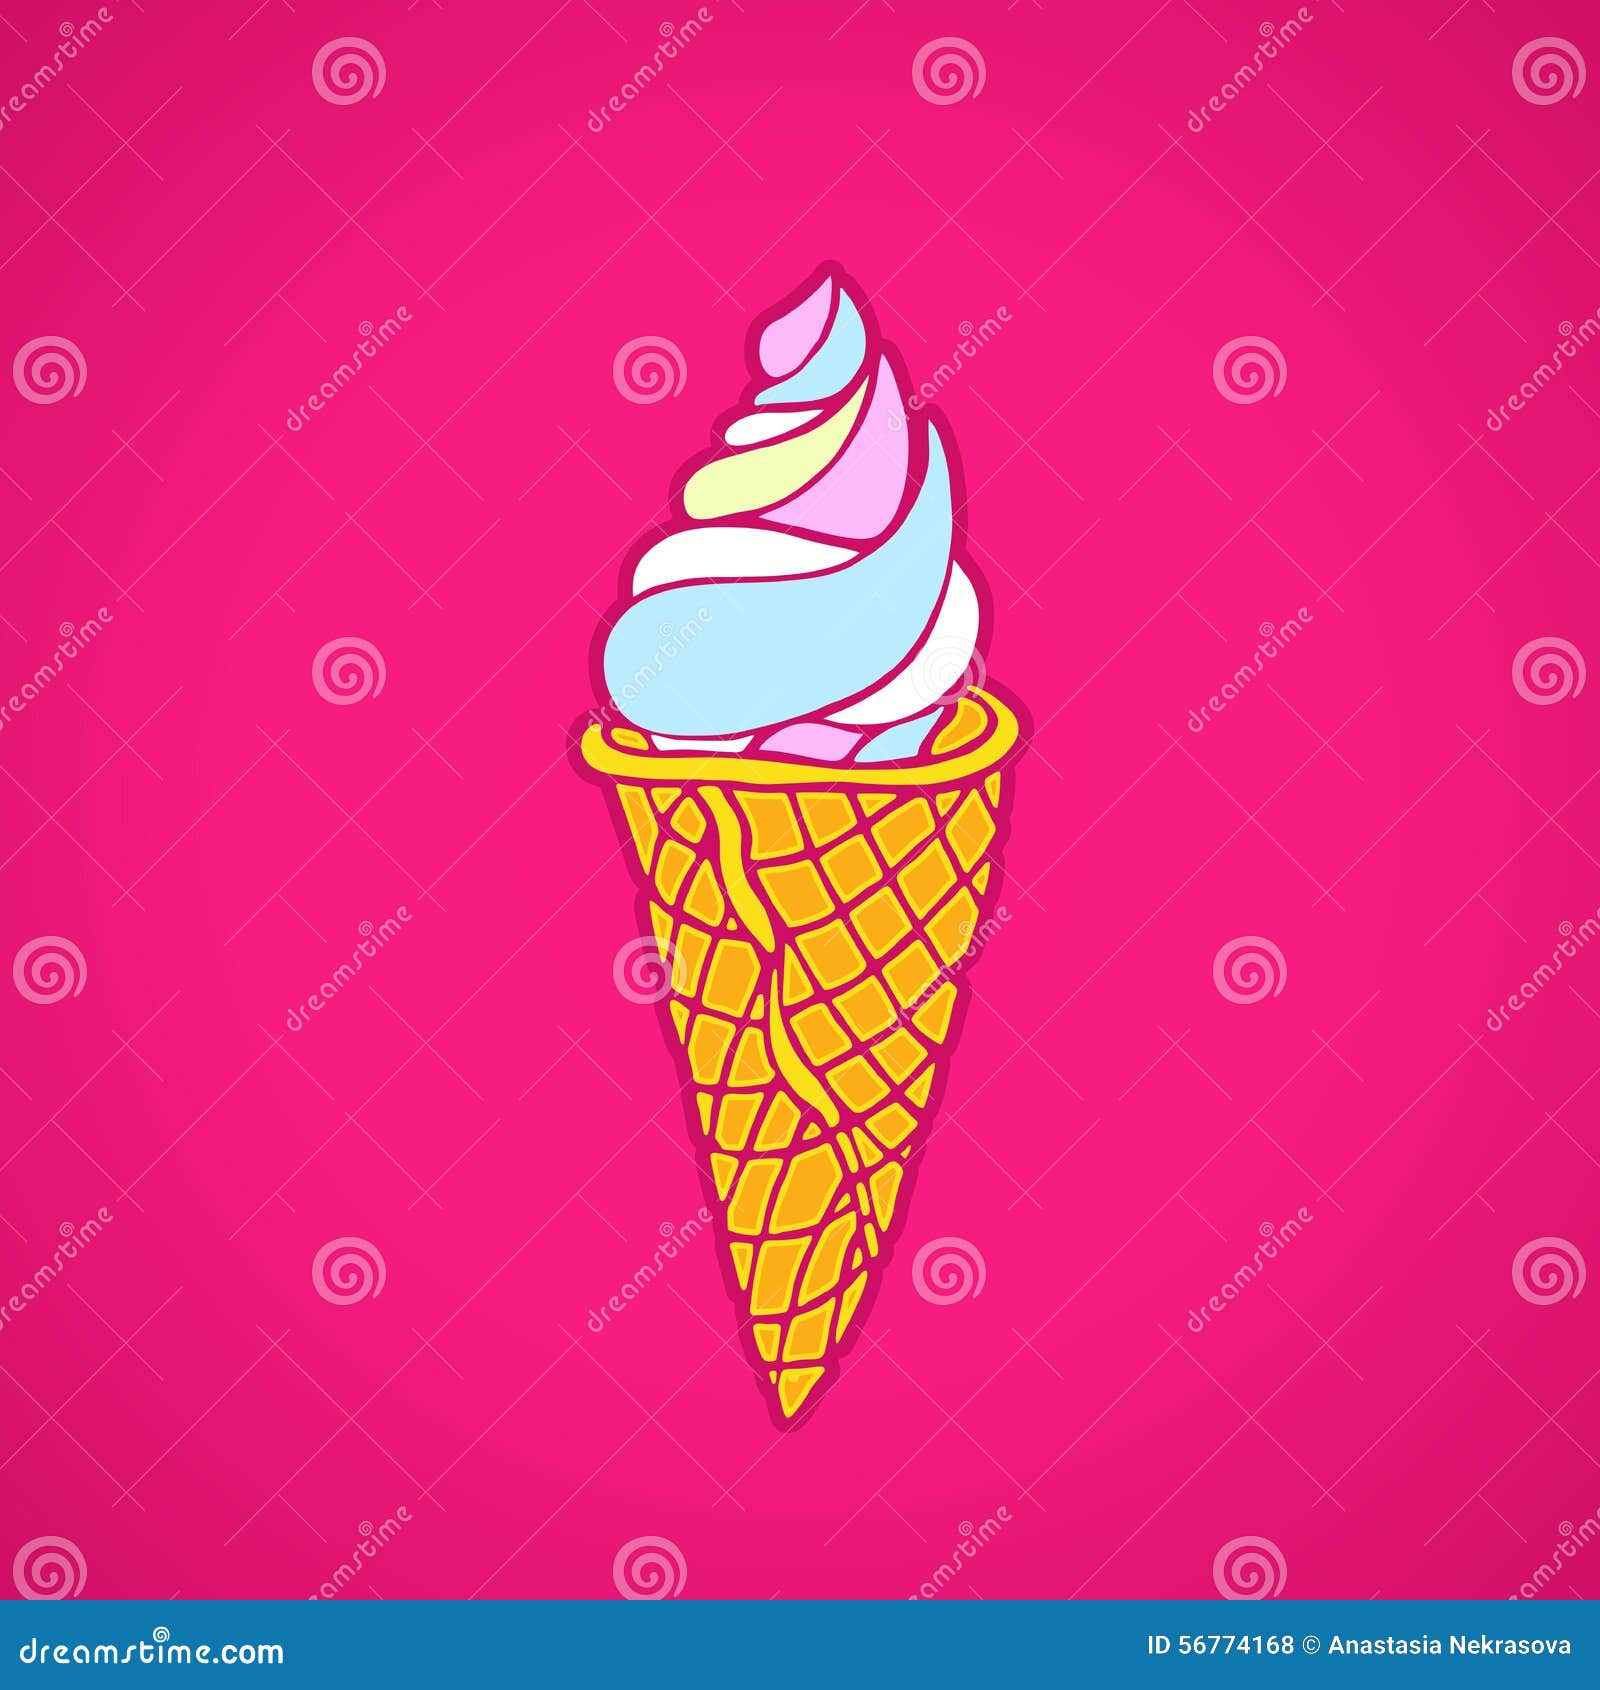 Bright soft ice cream in a waffle cone on a pink background